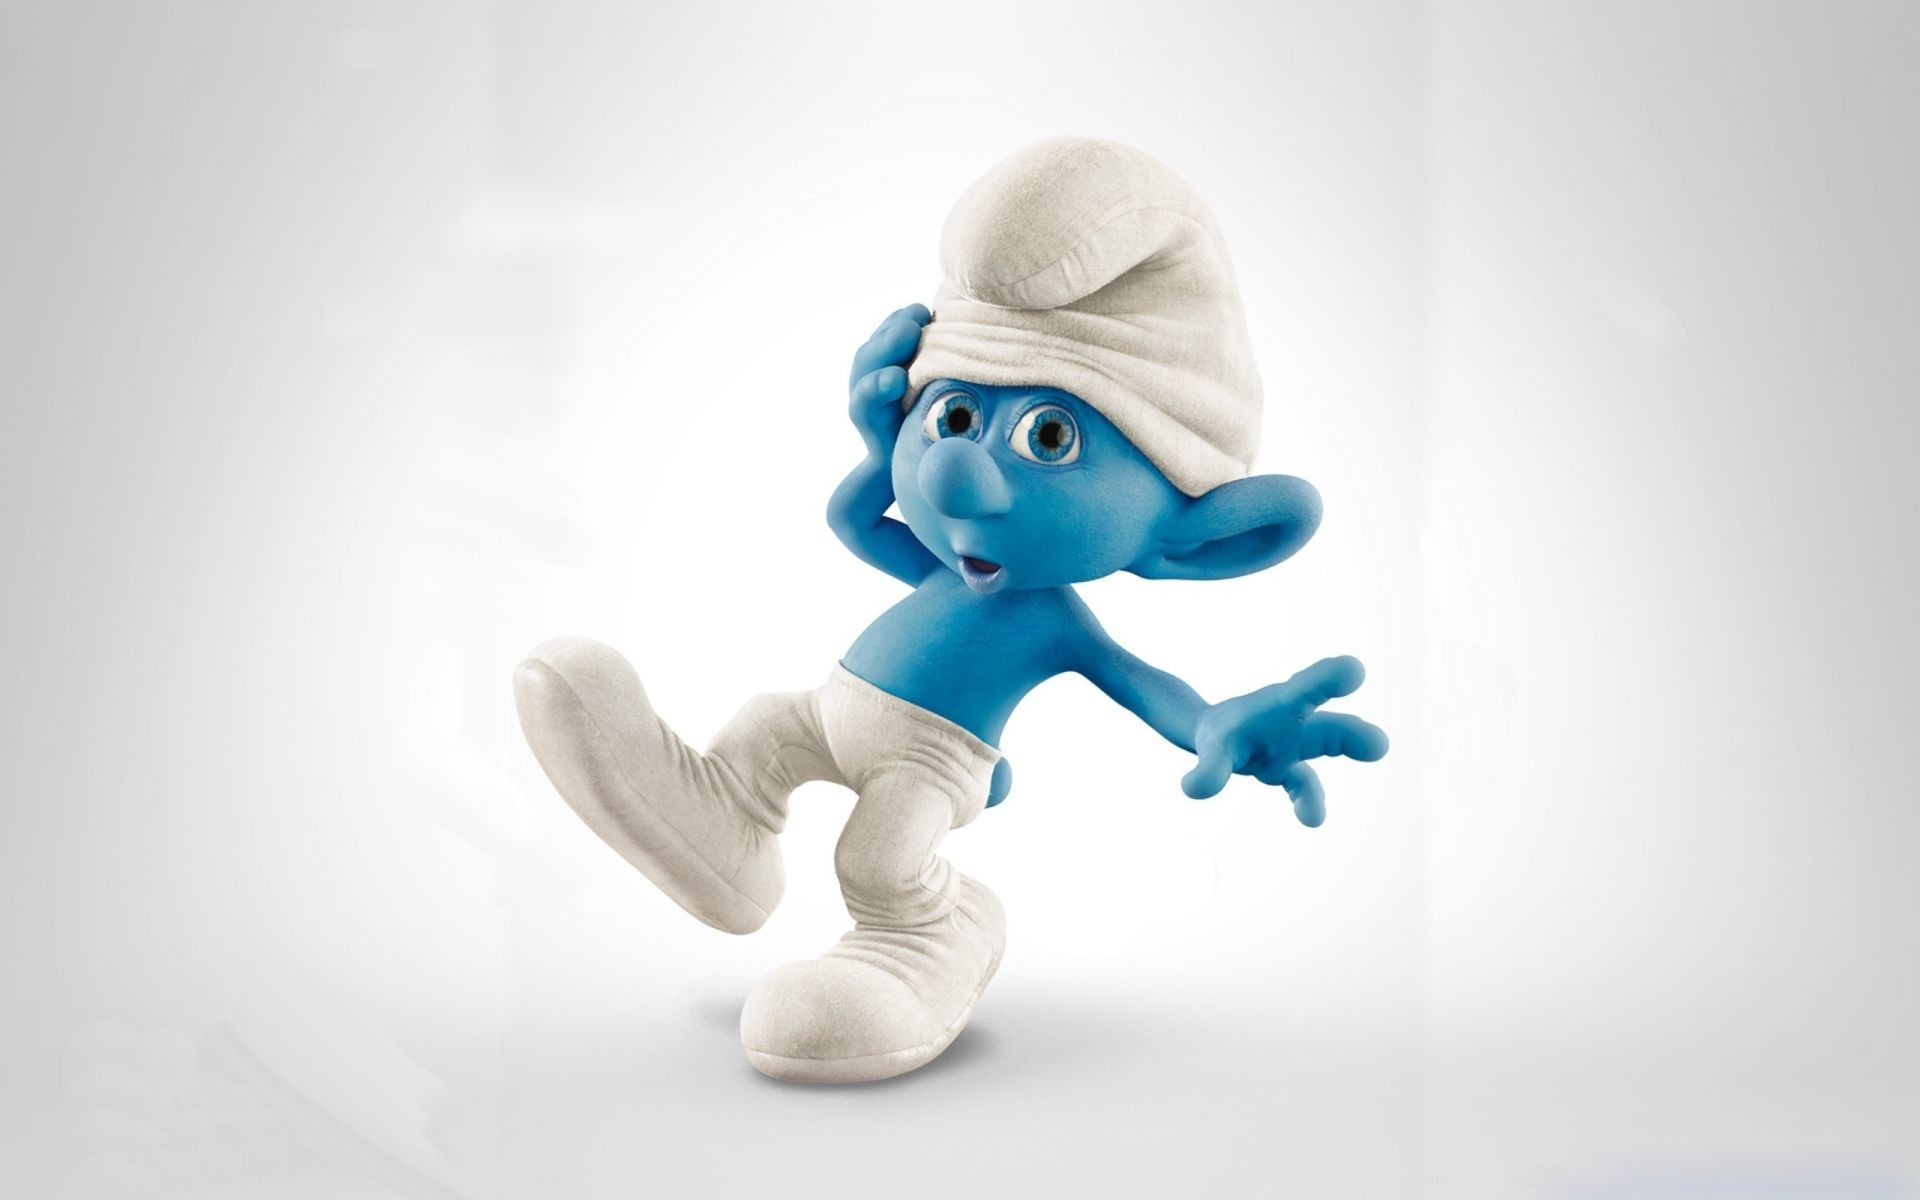 4. The Smurfs - wide 7